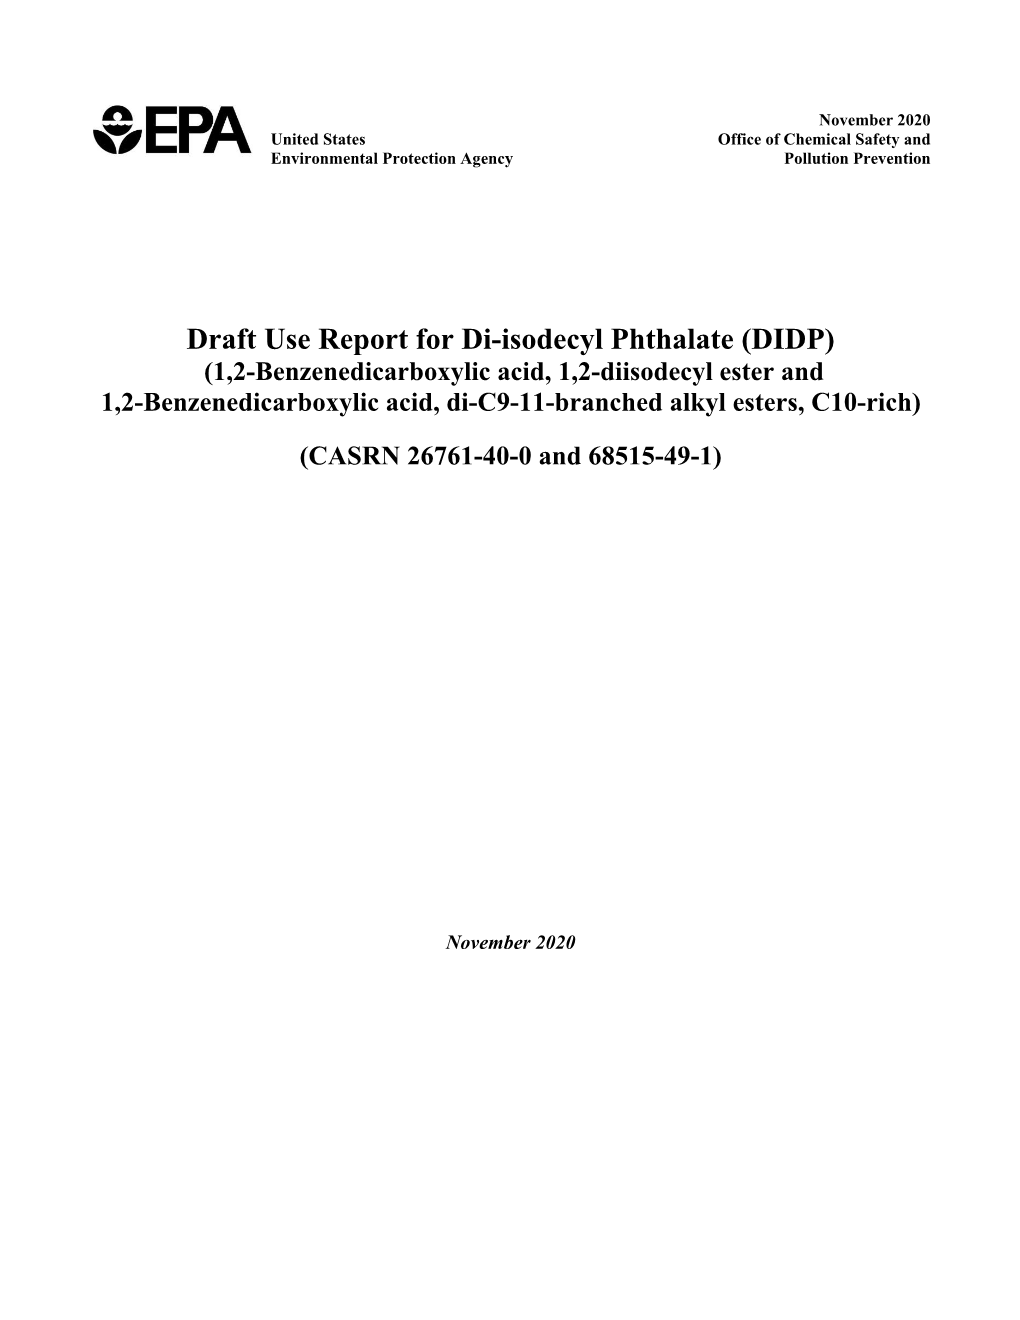 Draft Use Report for Di-Isodecyl Phthalate (DIDP)